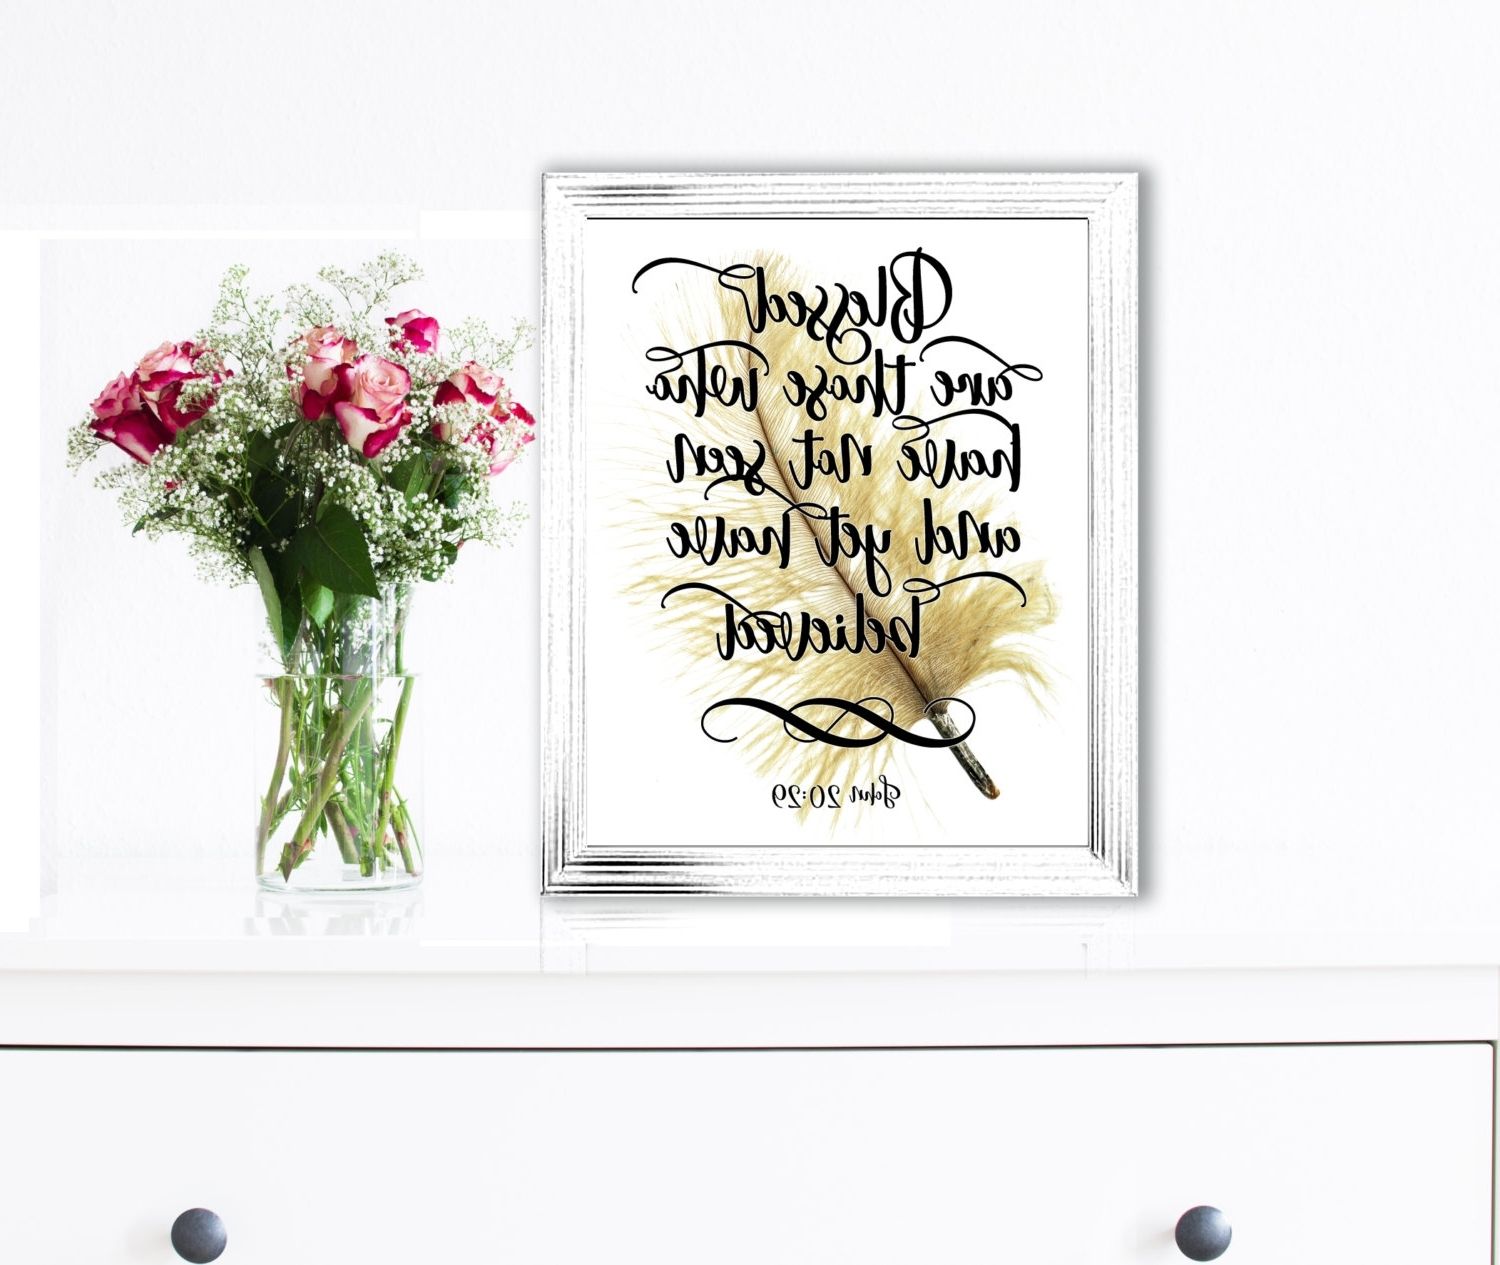 Widely Used Christian Framed Art Prints With Bible Verse Wall Art Print Bible Quotes Scripture Prints Christian (View 15 of 15)